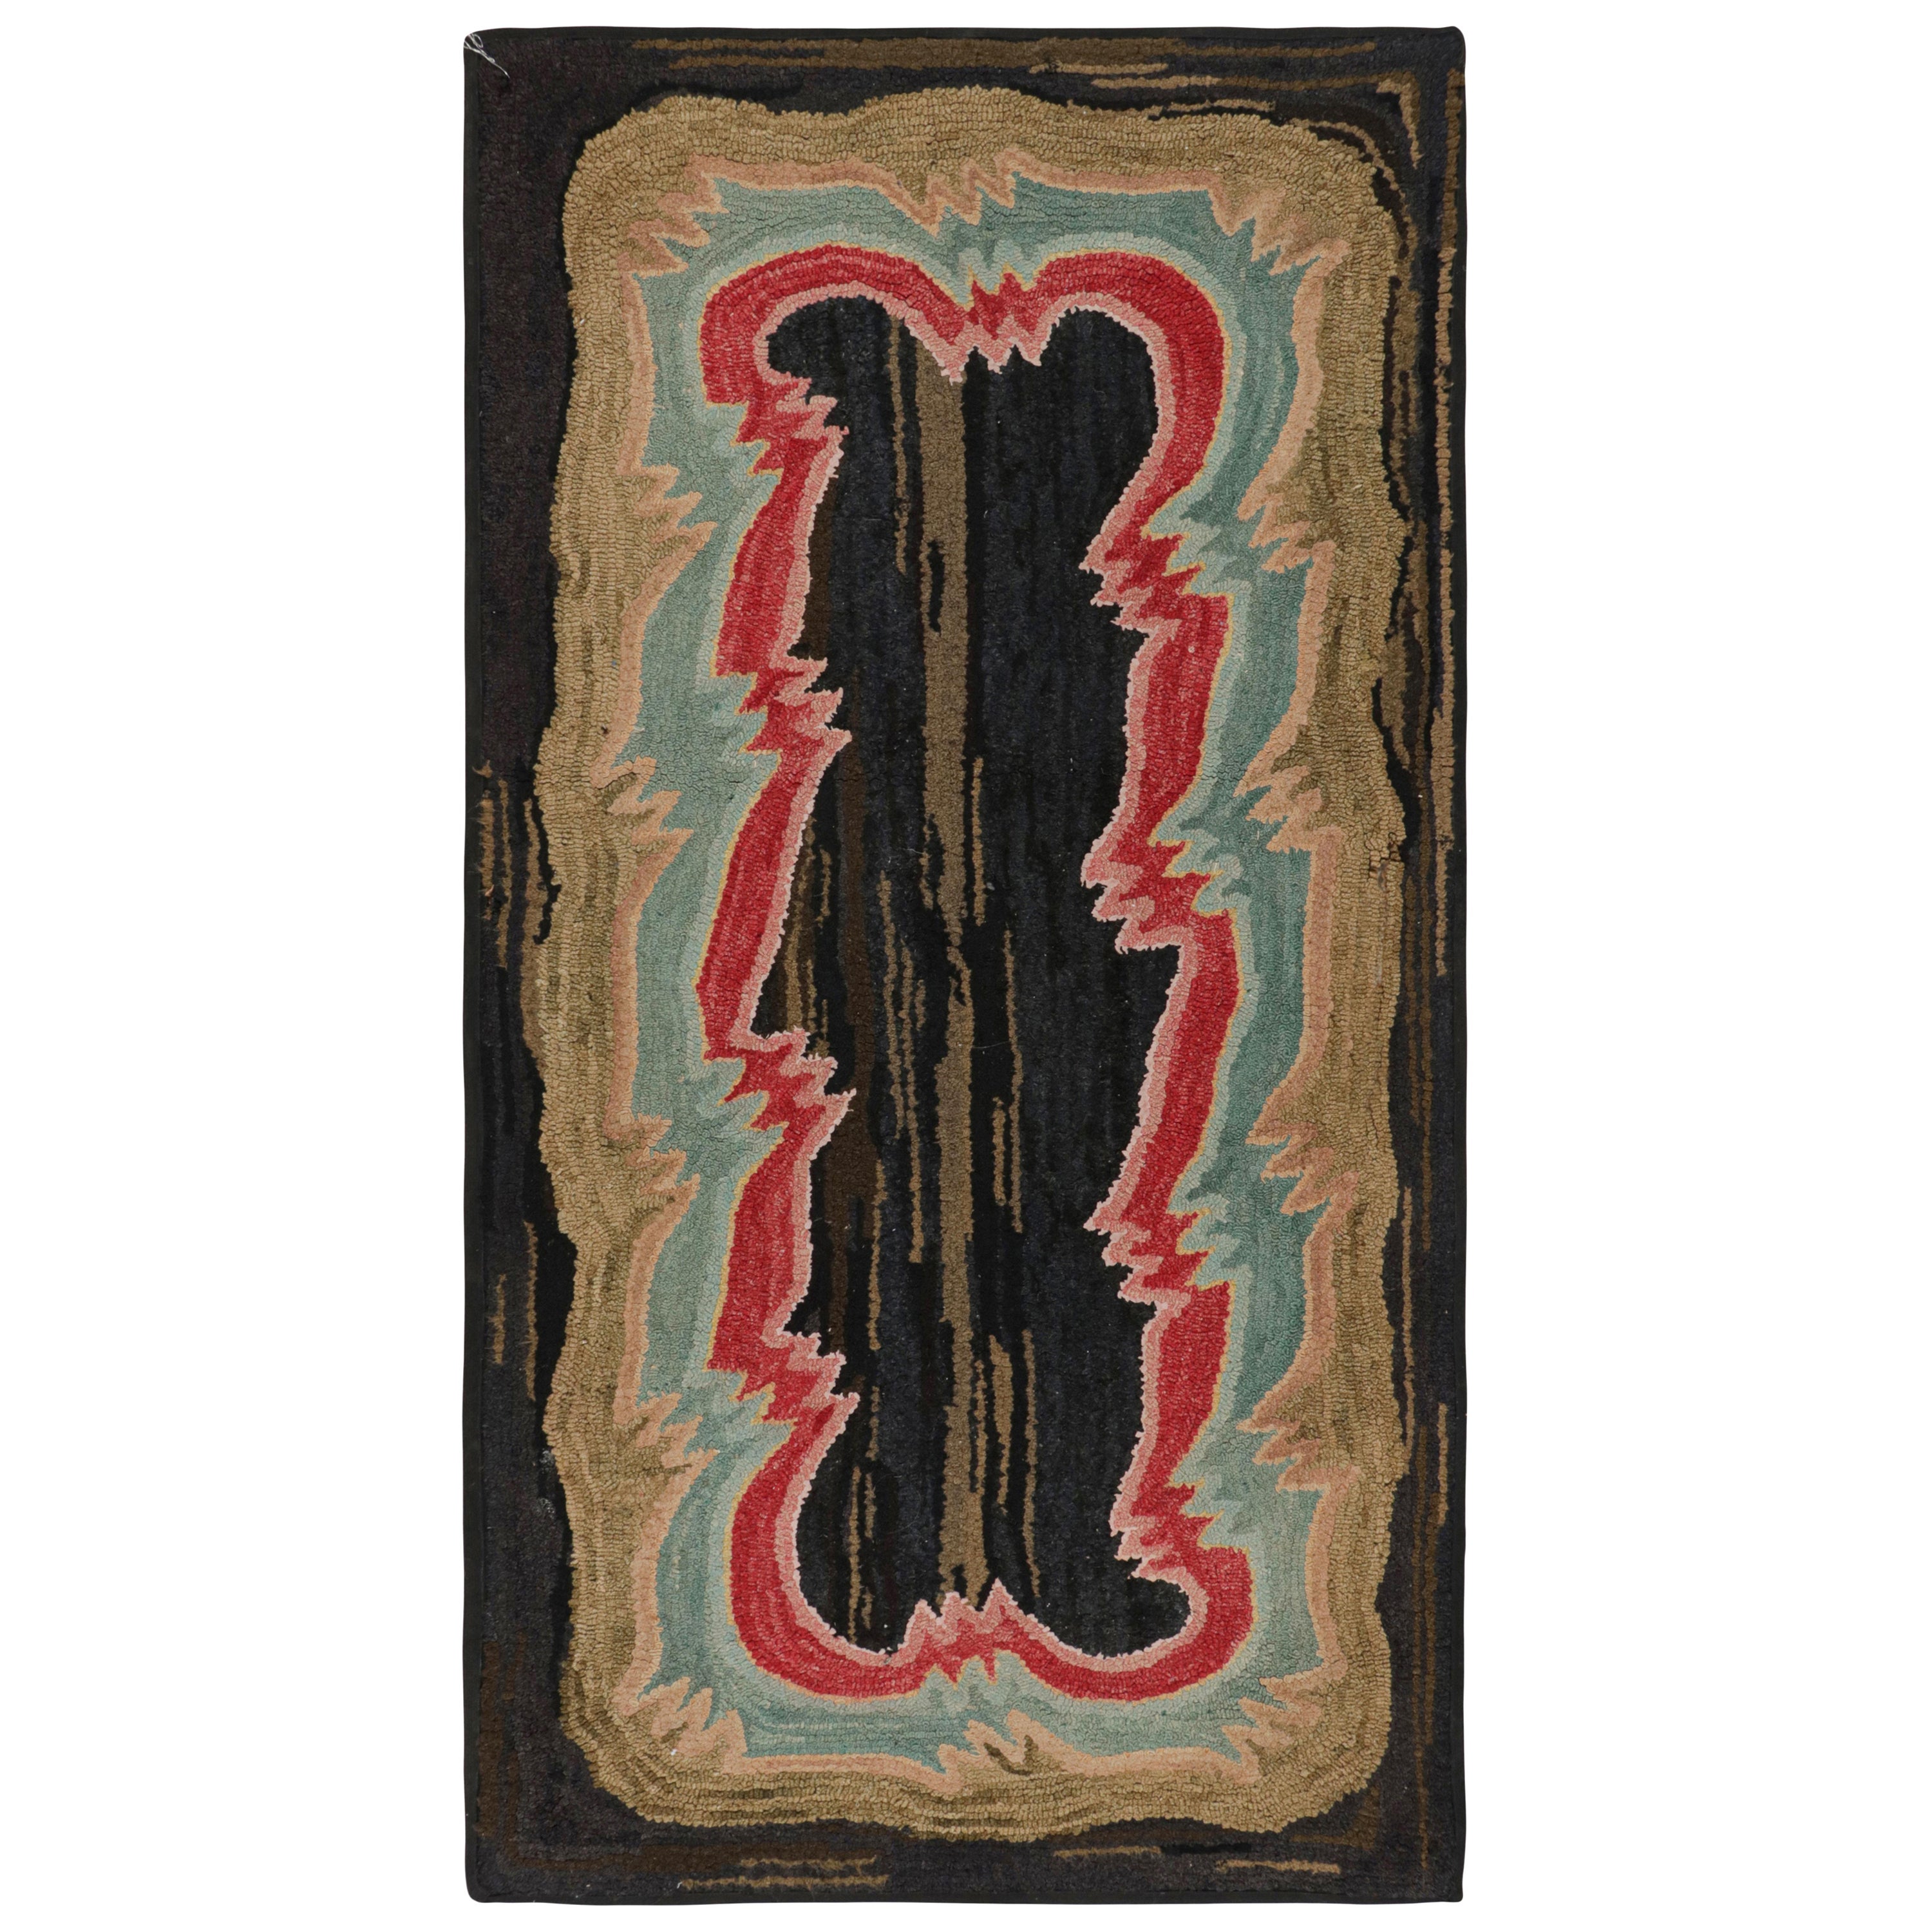 Antique Hooked Rug with Polychromatic Borders, from Rug & Kilim